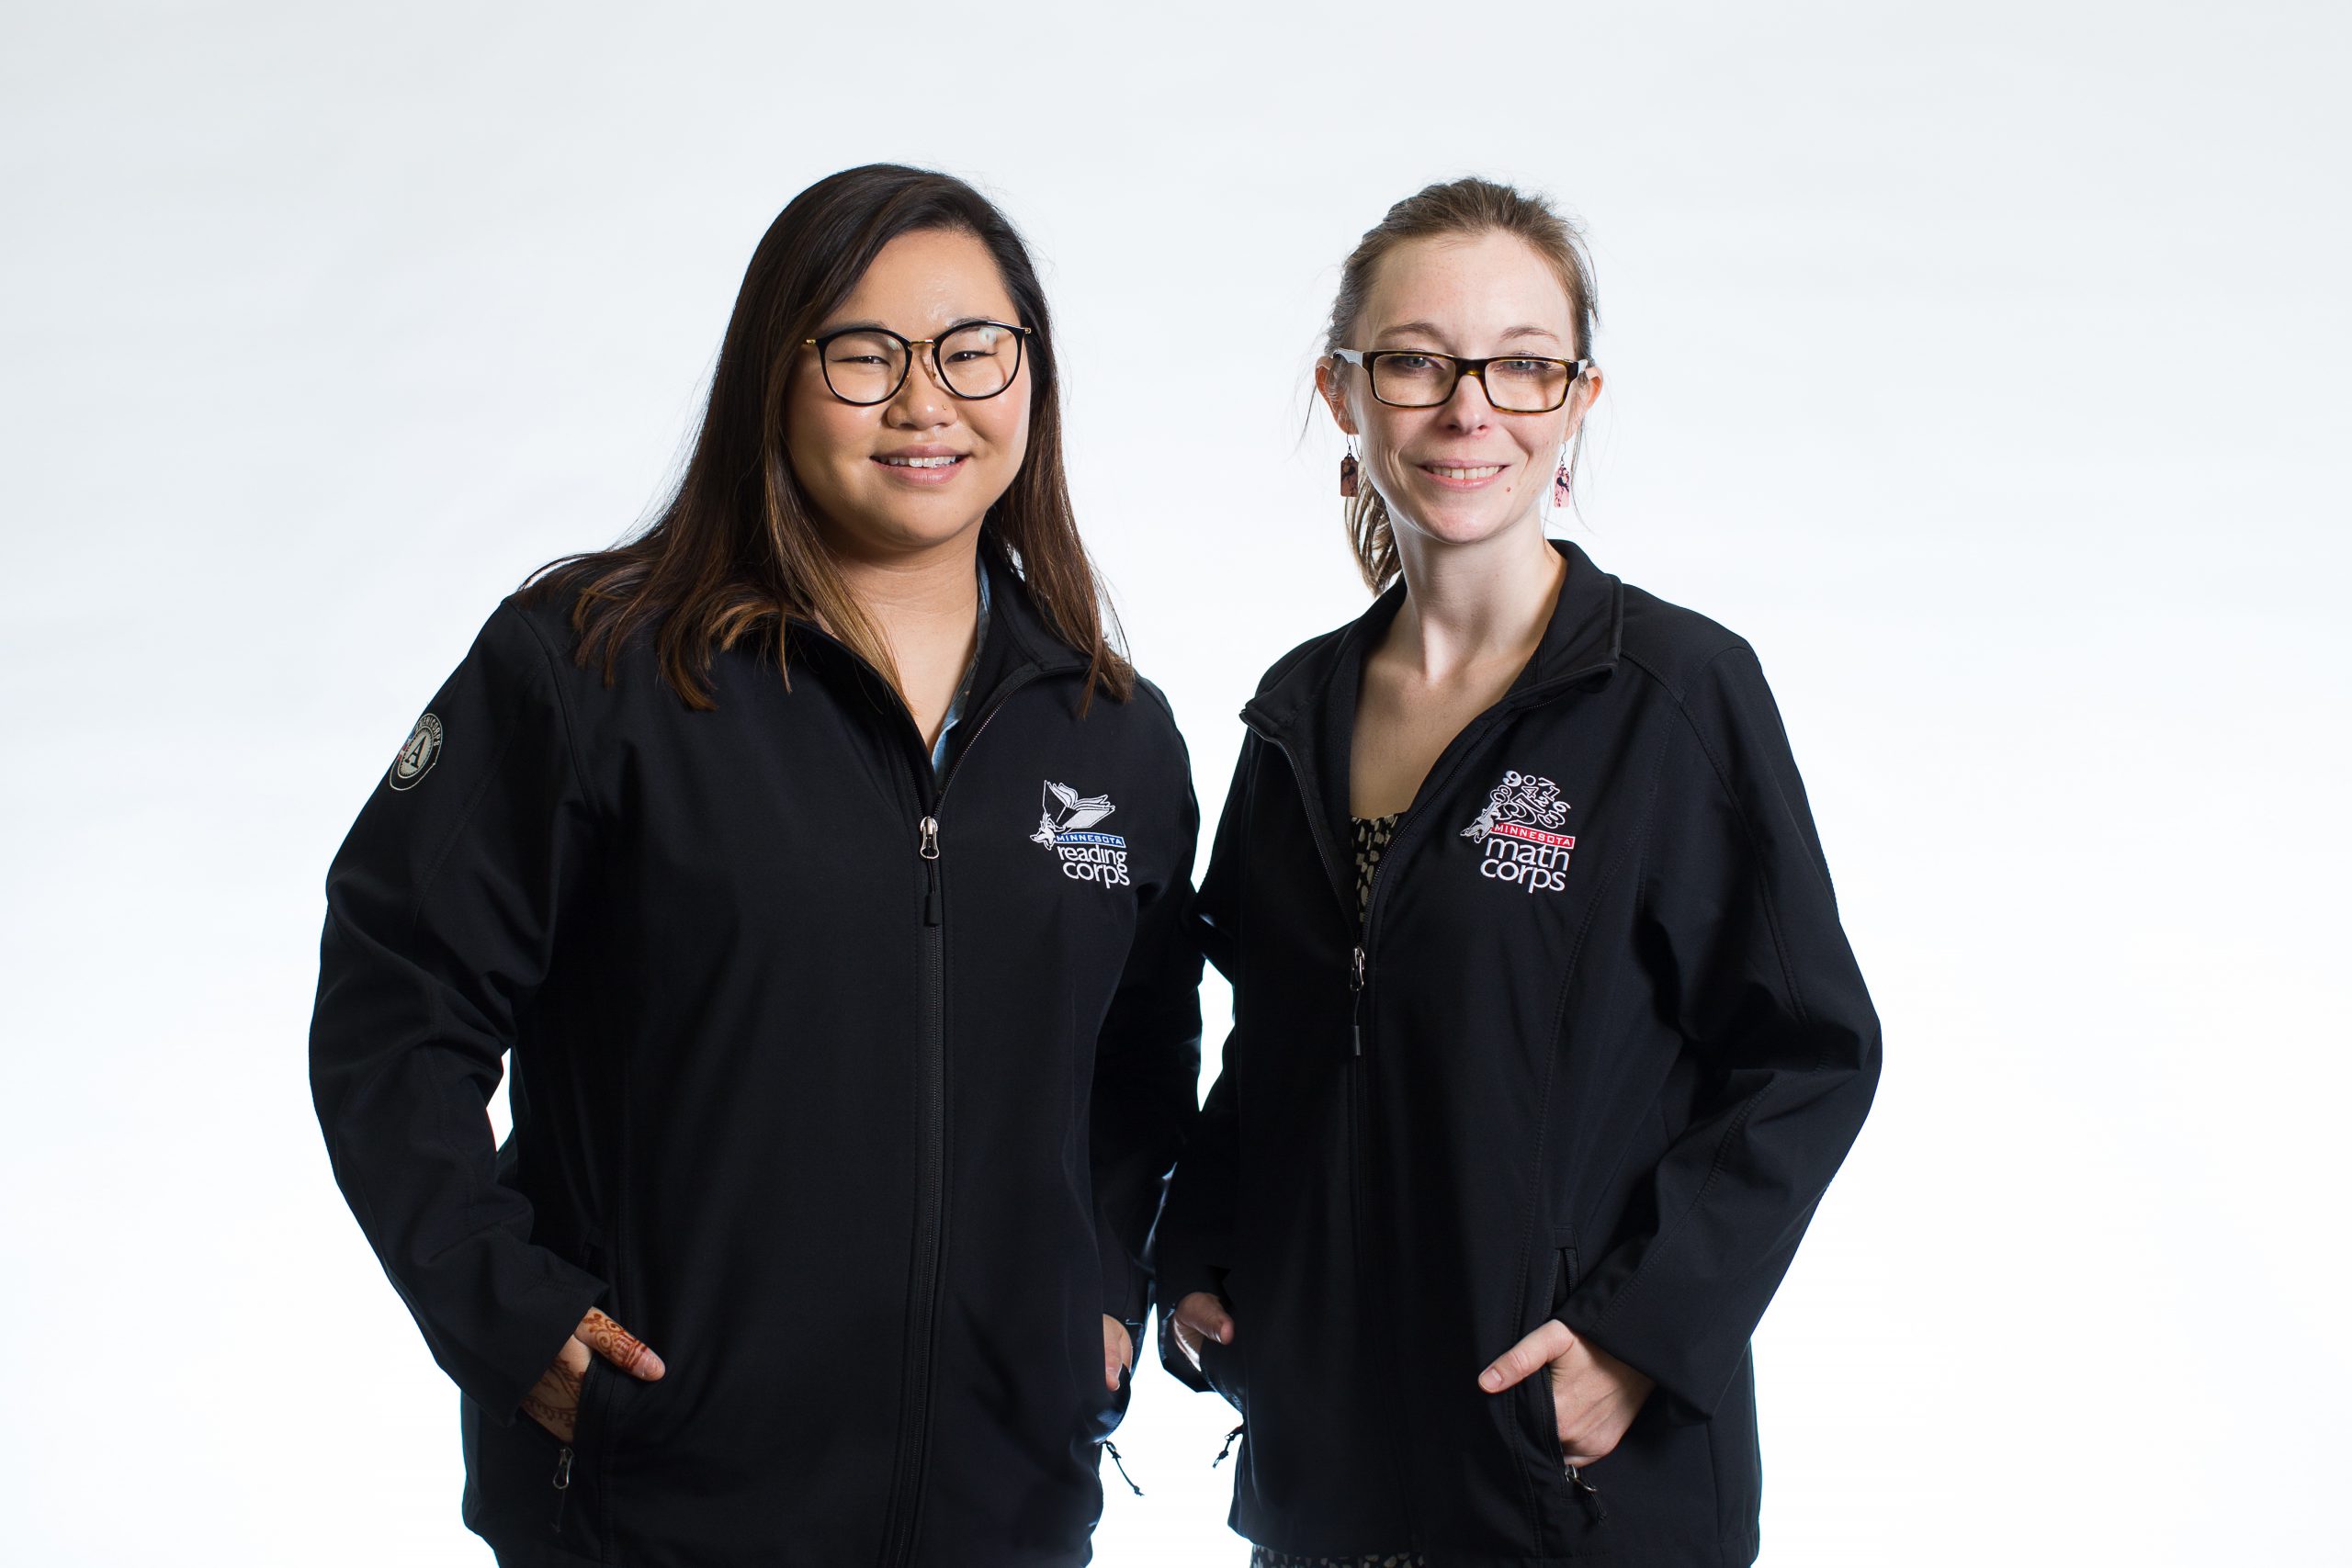 Two females modeling black Reading Corps and Math Corps jackets